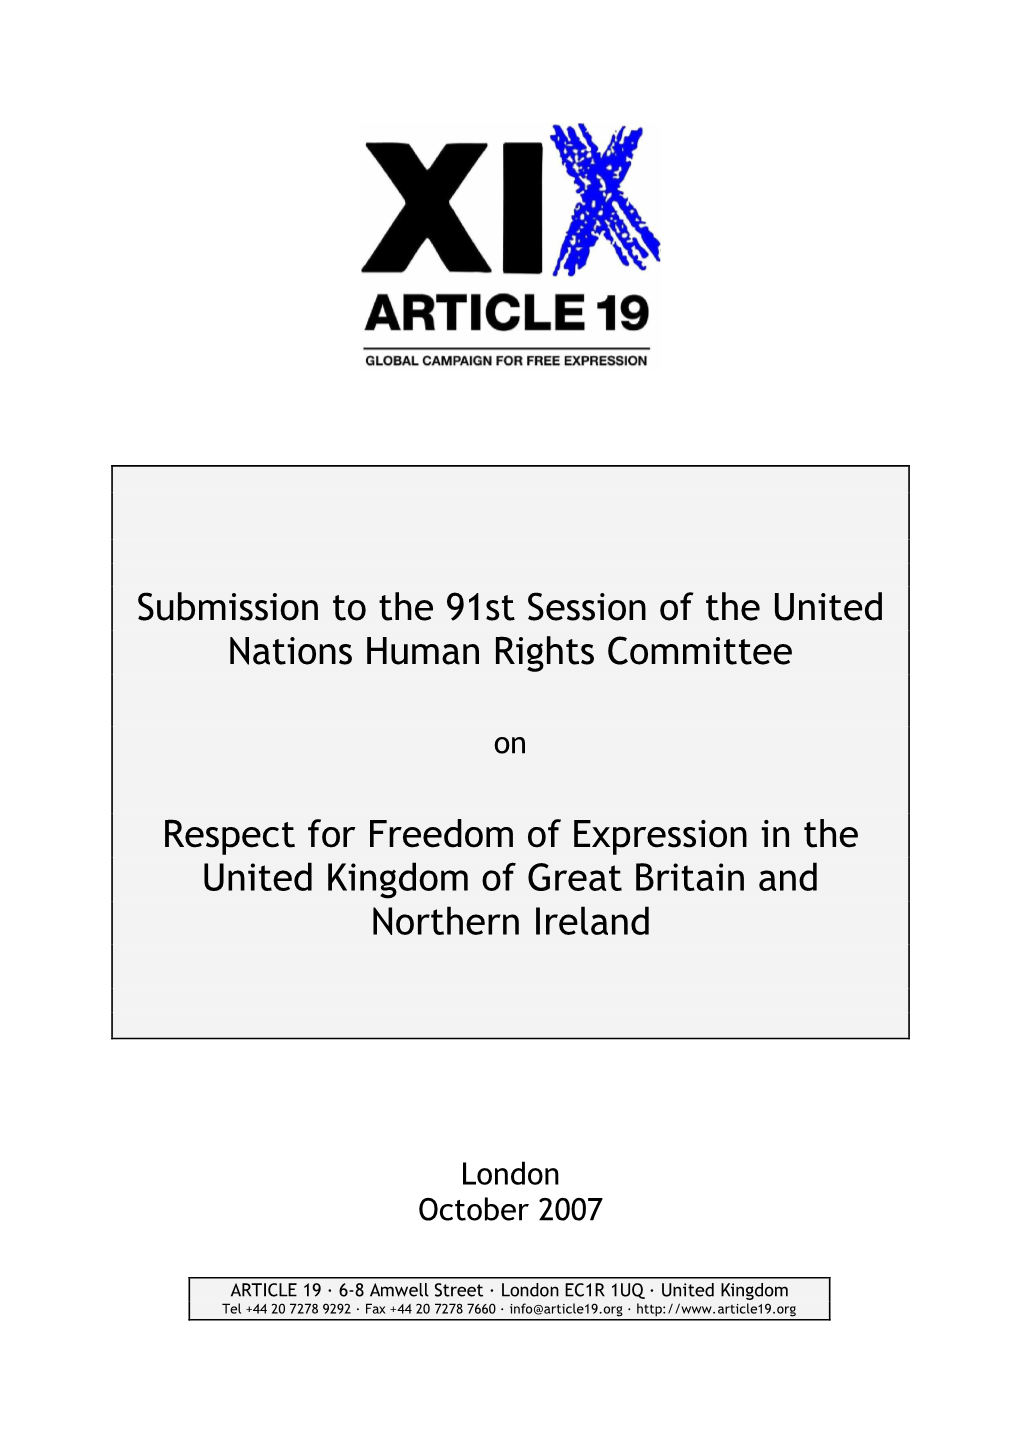 Submission to the 91St Session of the United Nations Human Rights Committee